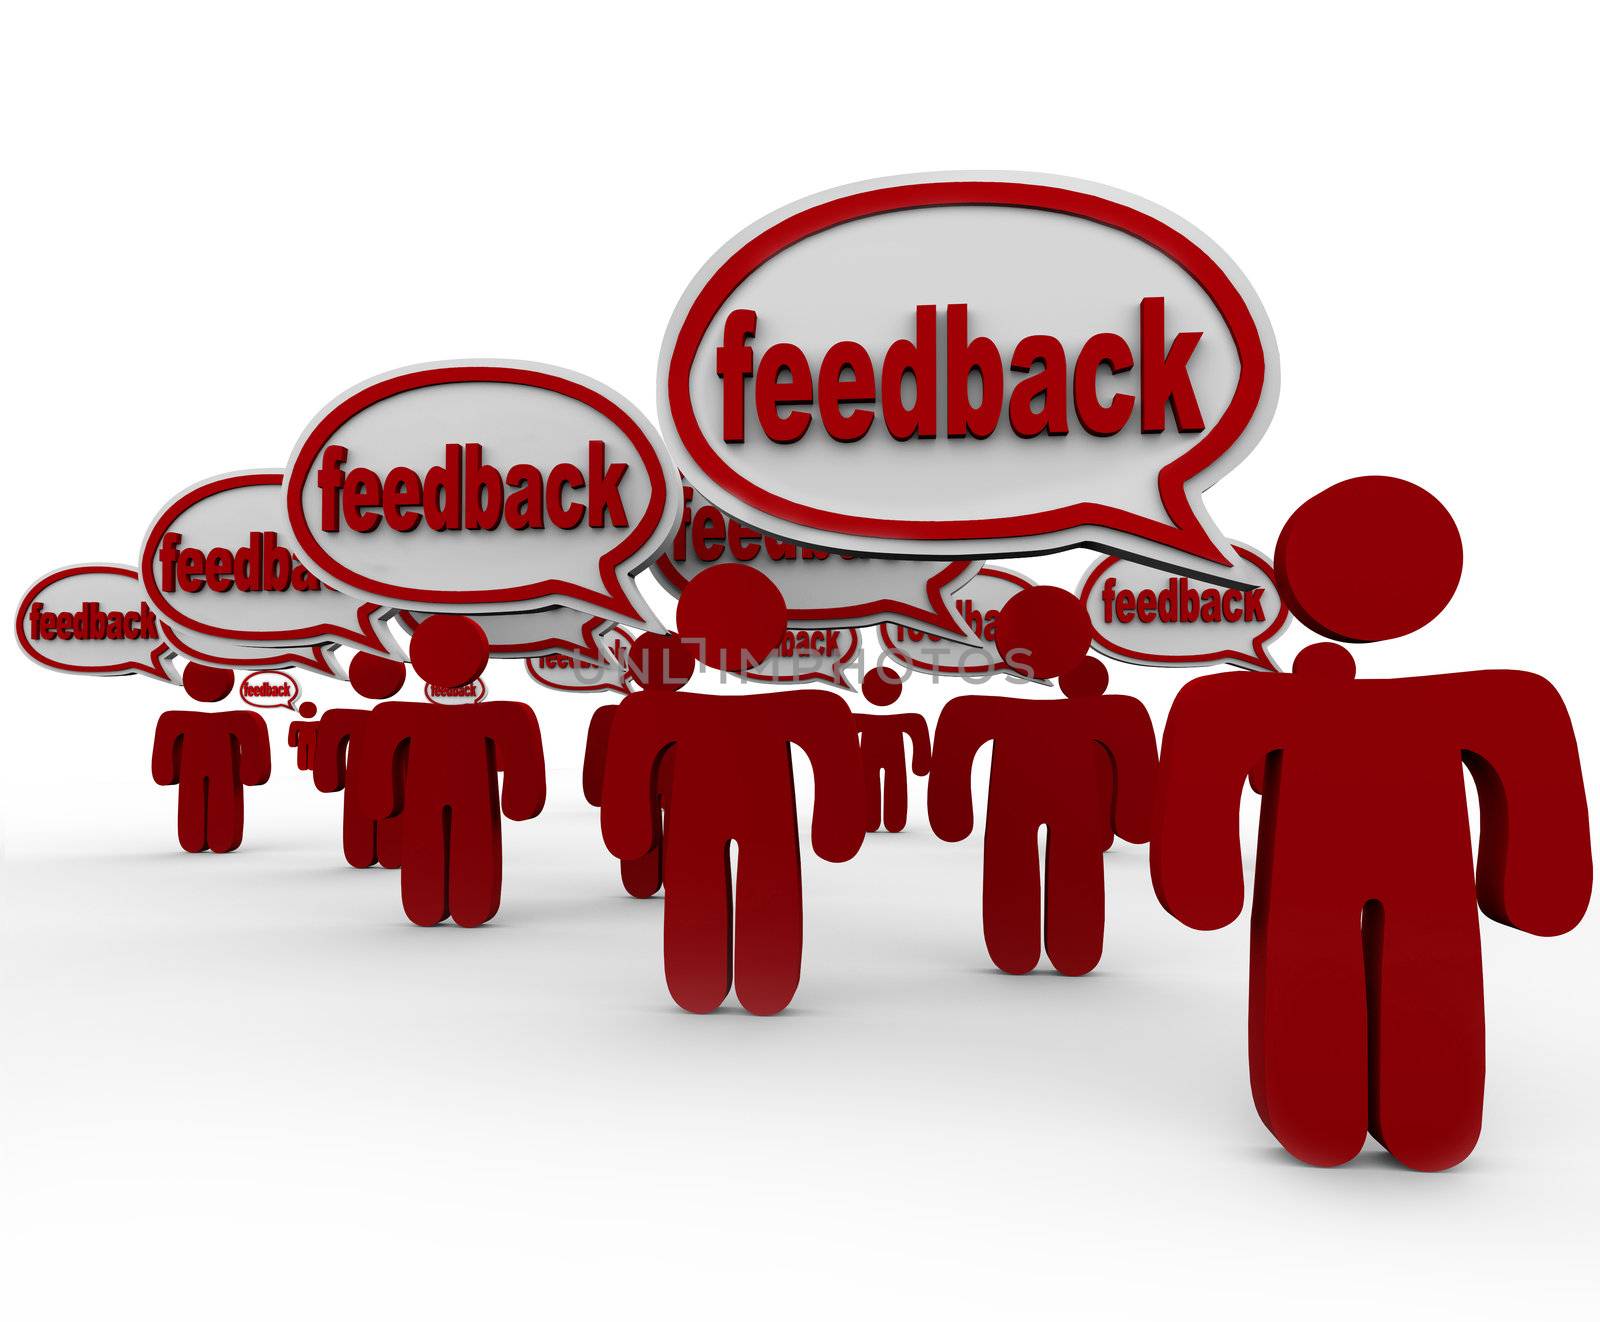 The word Feedback in many speech bubbles spoken by several people sharing their opinions and voicing concerns and criticism to communicate their thoughts